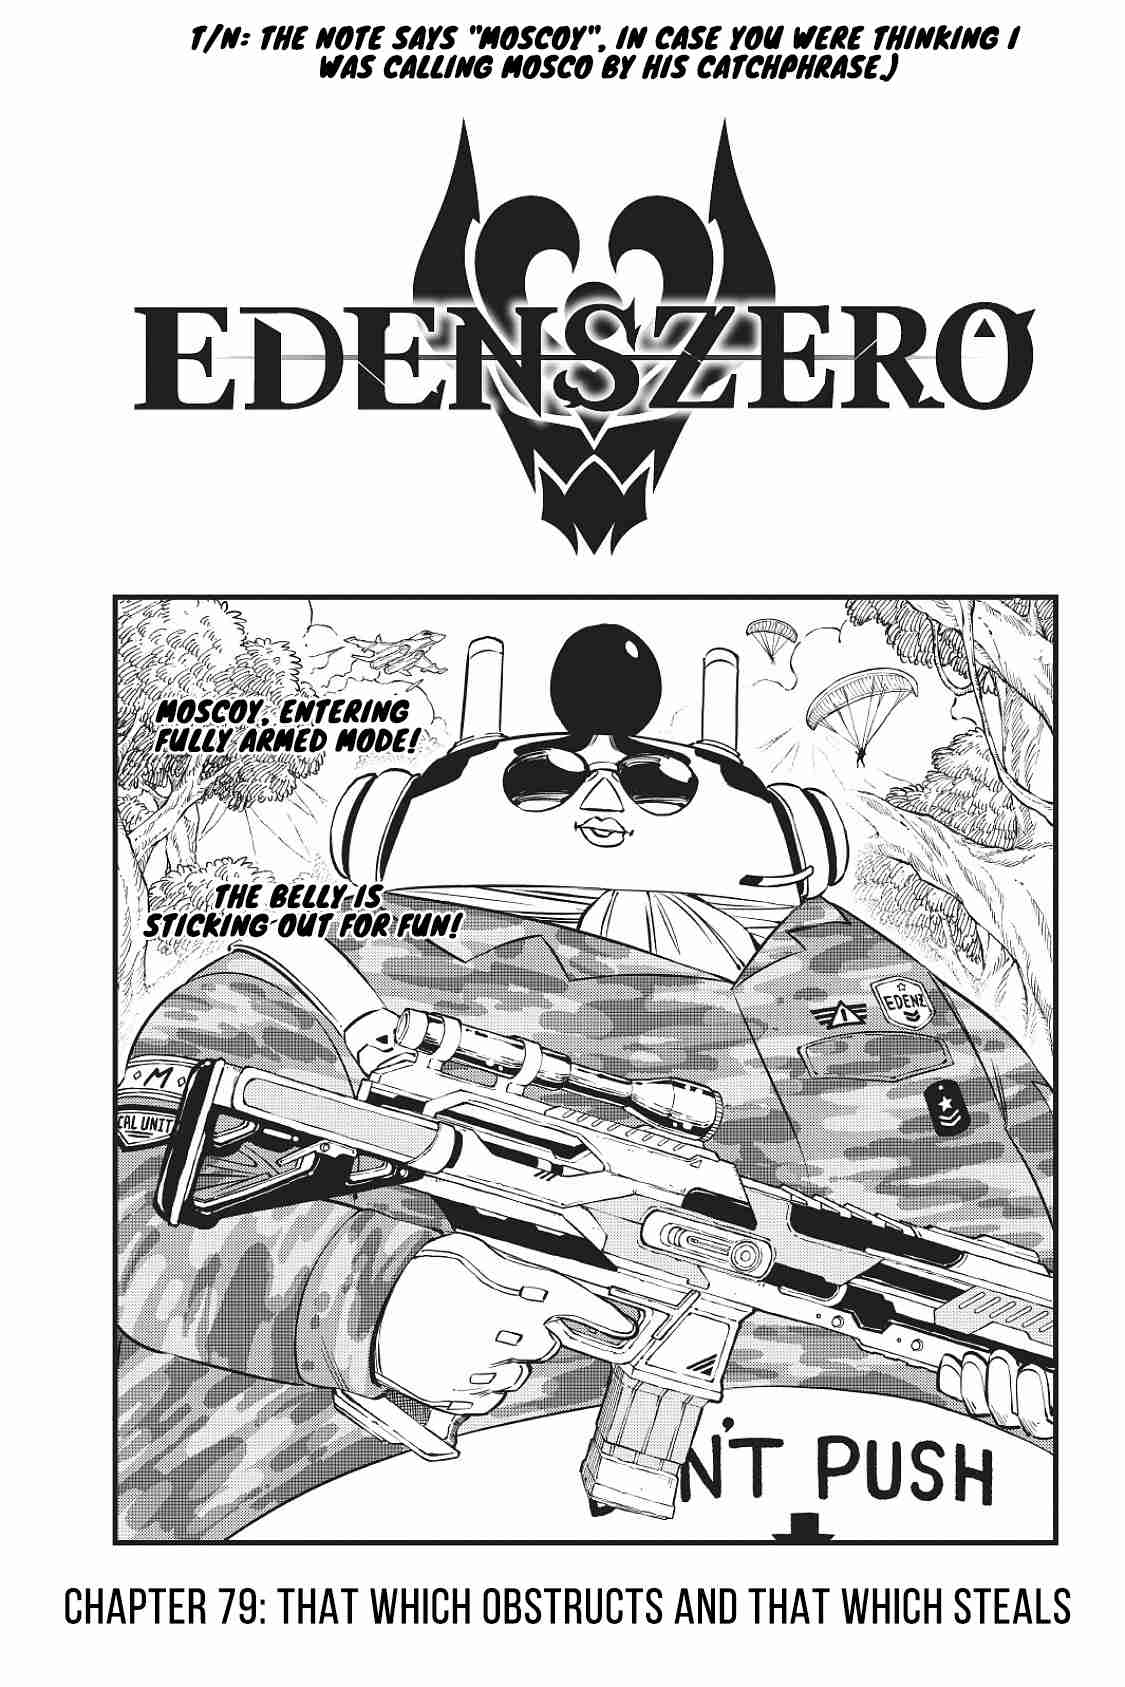 Edens Zero Ch. 79 That Which Obstructs and That Which Steals